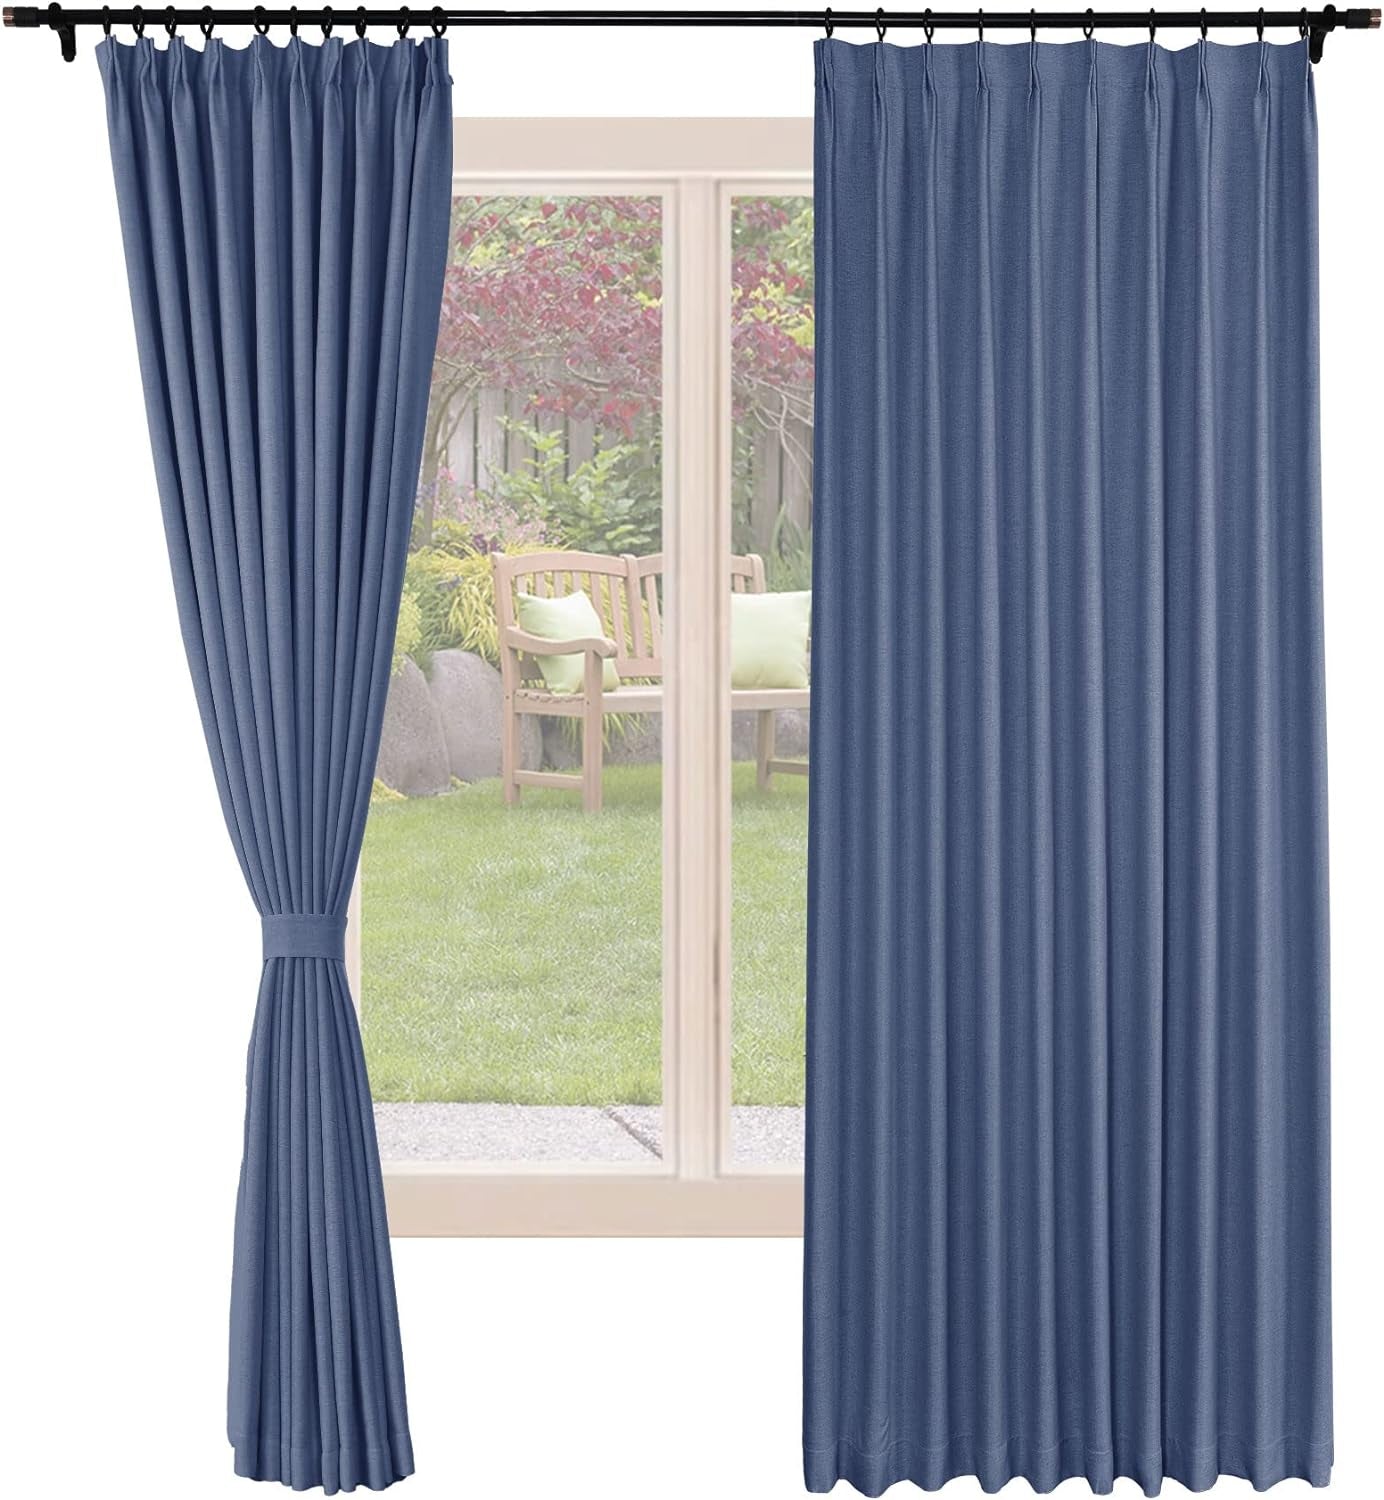 Frelement Blackout Curtains Natural Linen Curtains Pinch Pleat Drapery Panels for Living Room Thermal Insulated Curtains, 52" W X 63" L, 2 Panels, Oasis  Frelement 31 Delft Blue (52Wx84L Inch)*2 